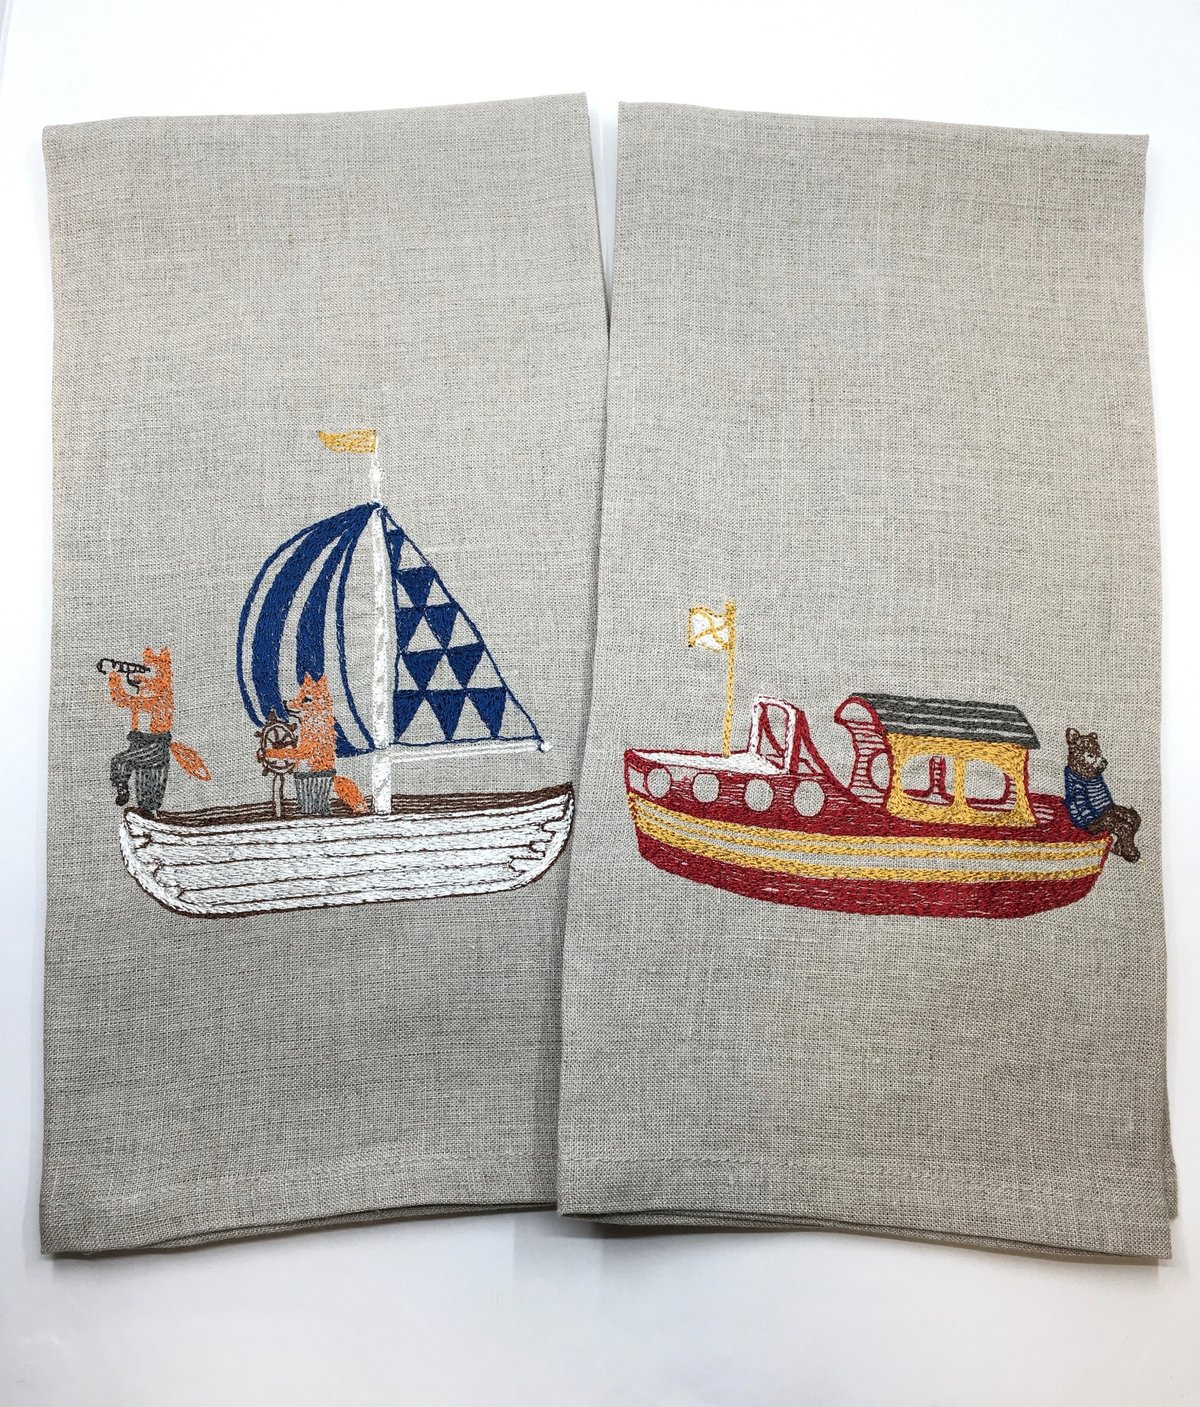   Embroidered Tea Towels by Coral & Tusk